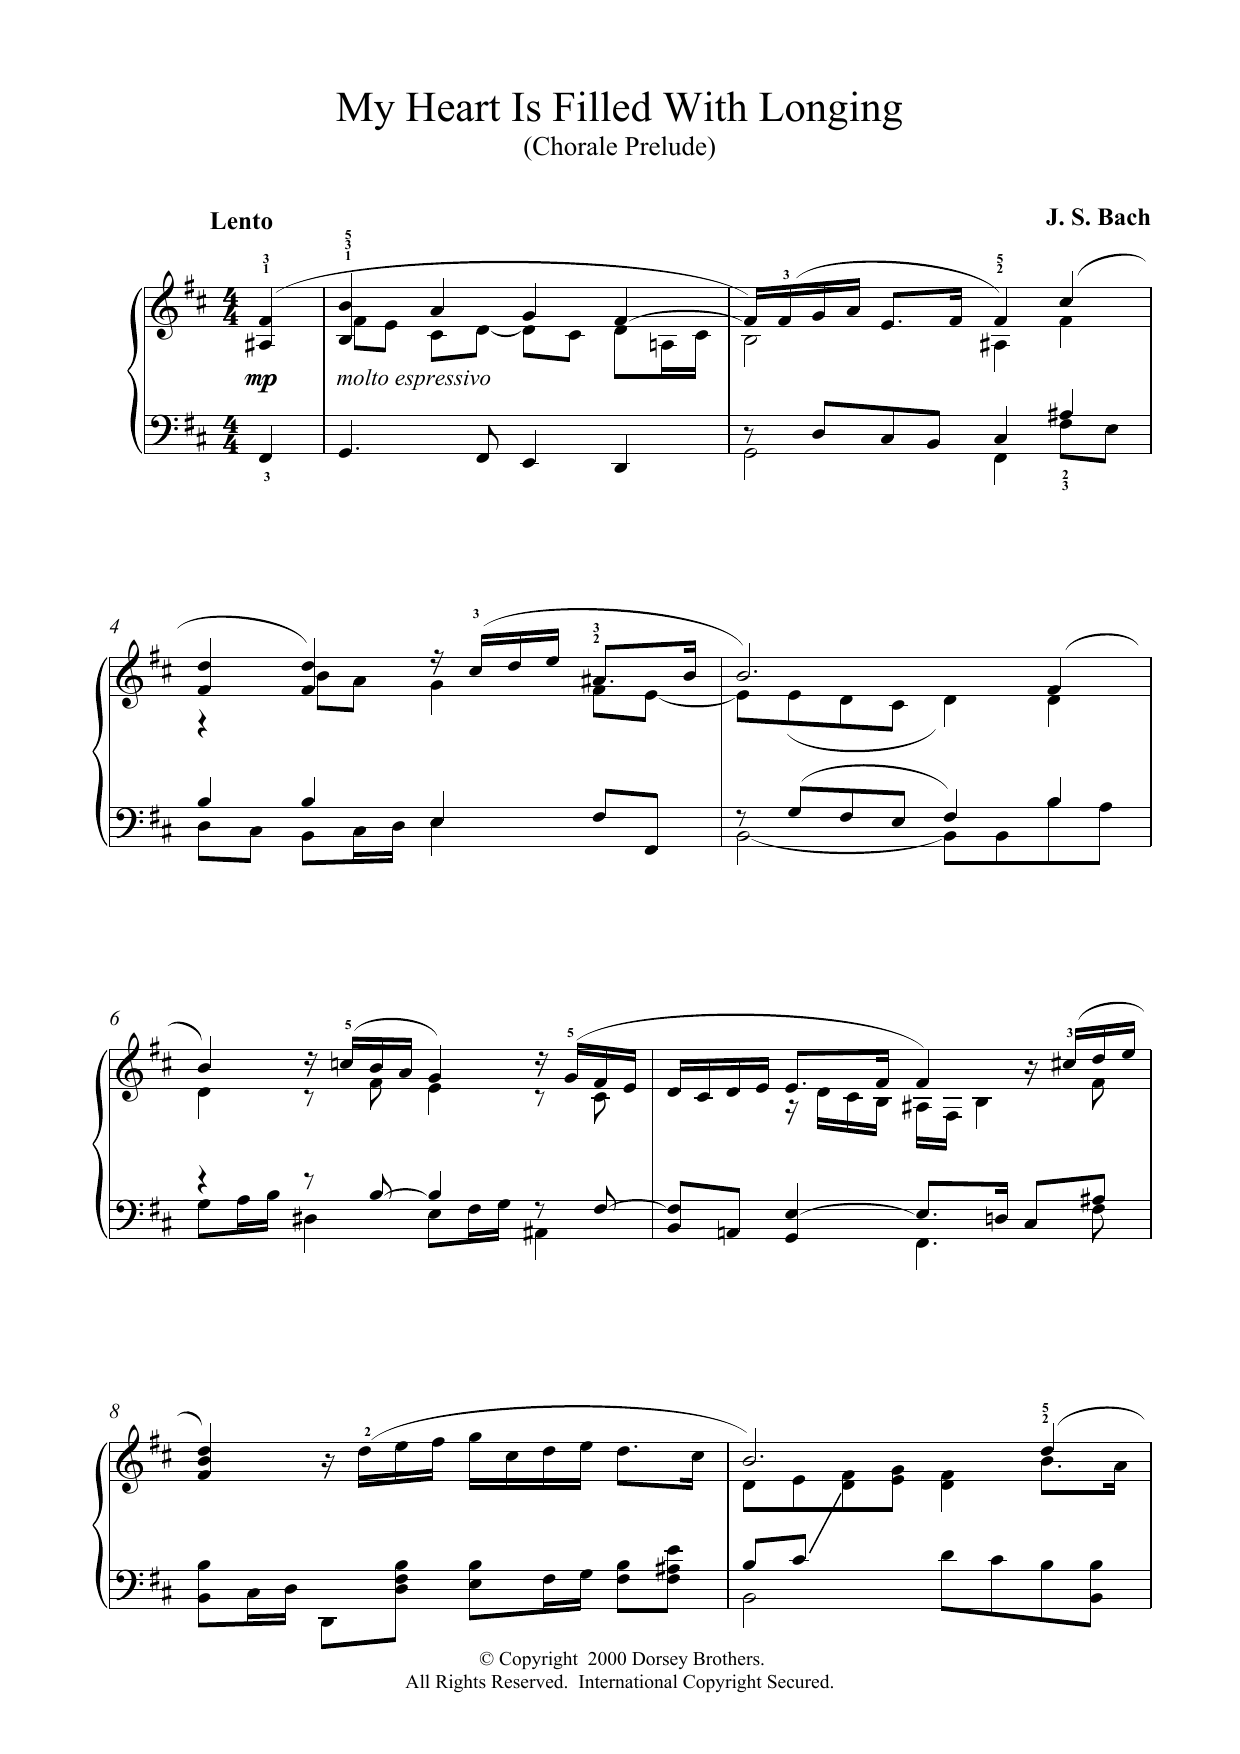 Johann Sebastian Bach My Heart Is Filled With Longing sheet music notes printable PDF score